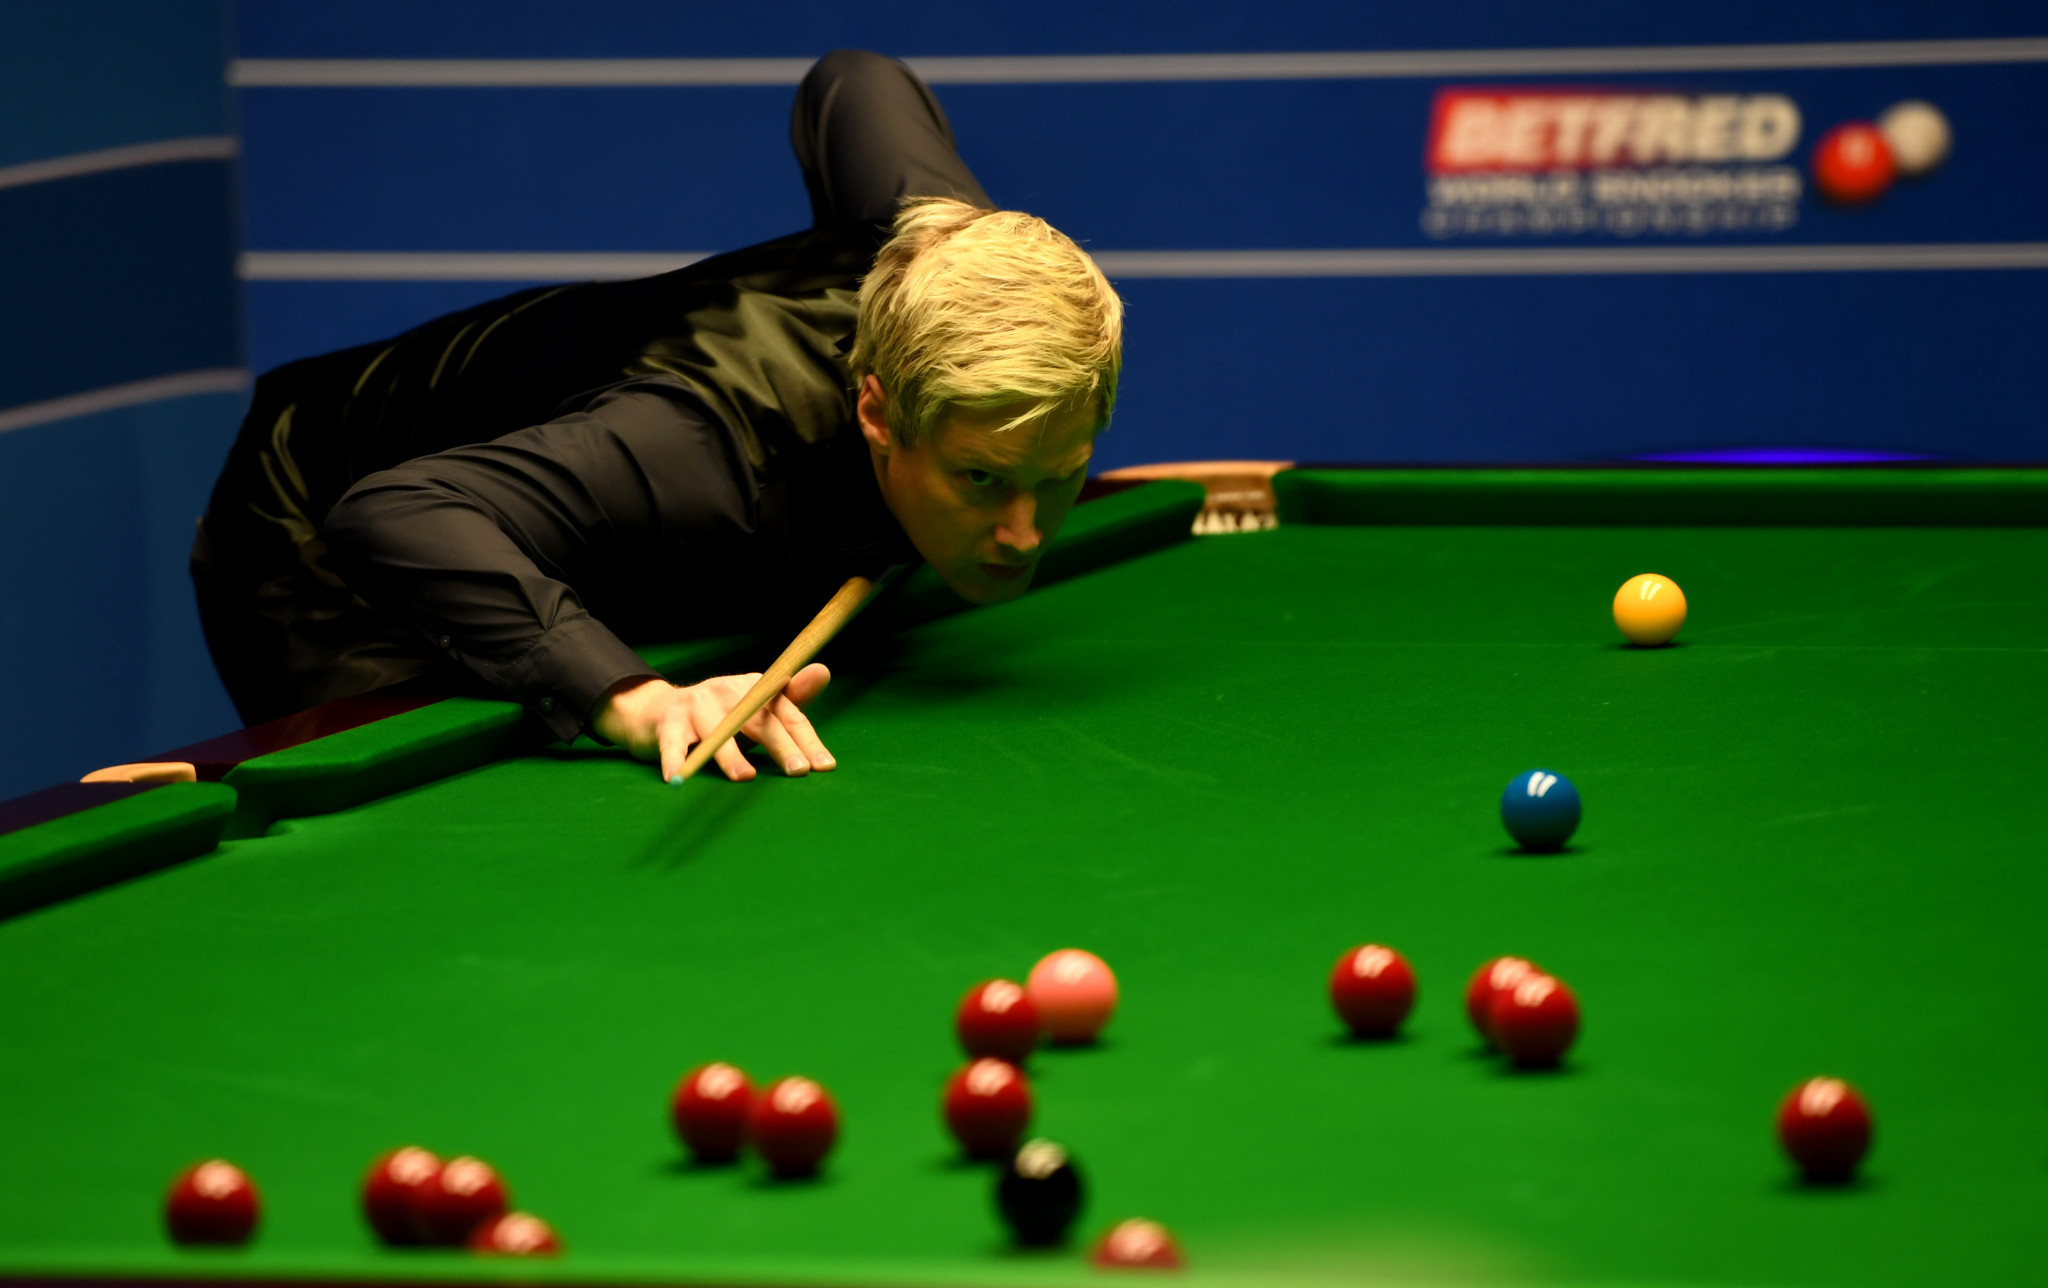 Former champions Robertson and Higgins among winners on day three of World Snooker Championship